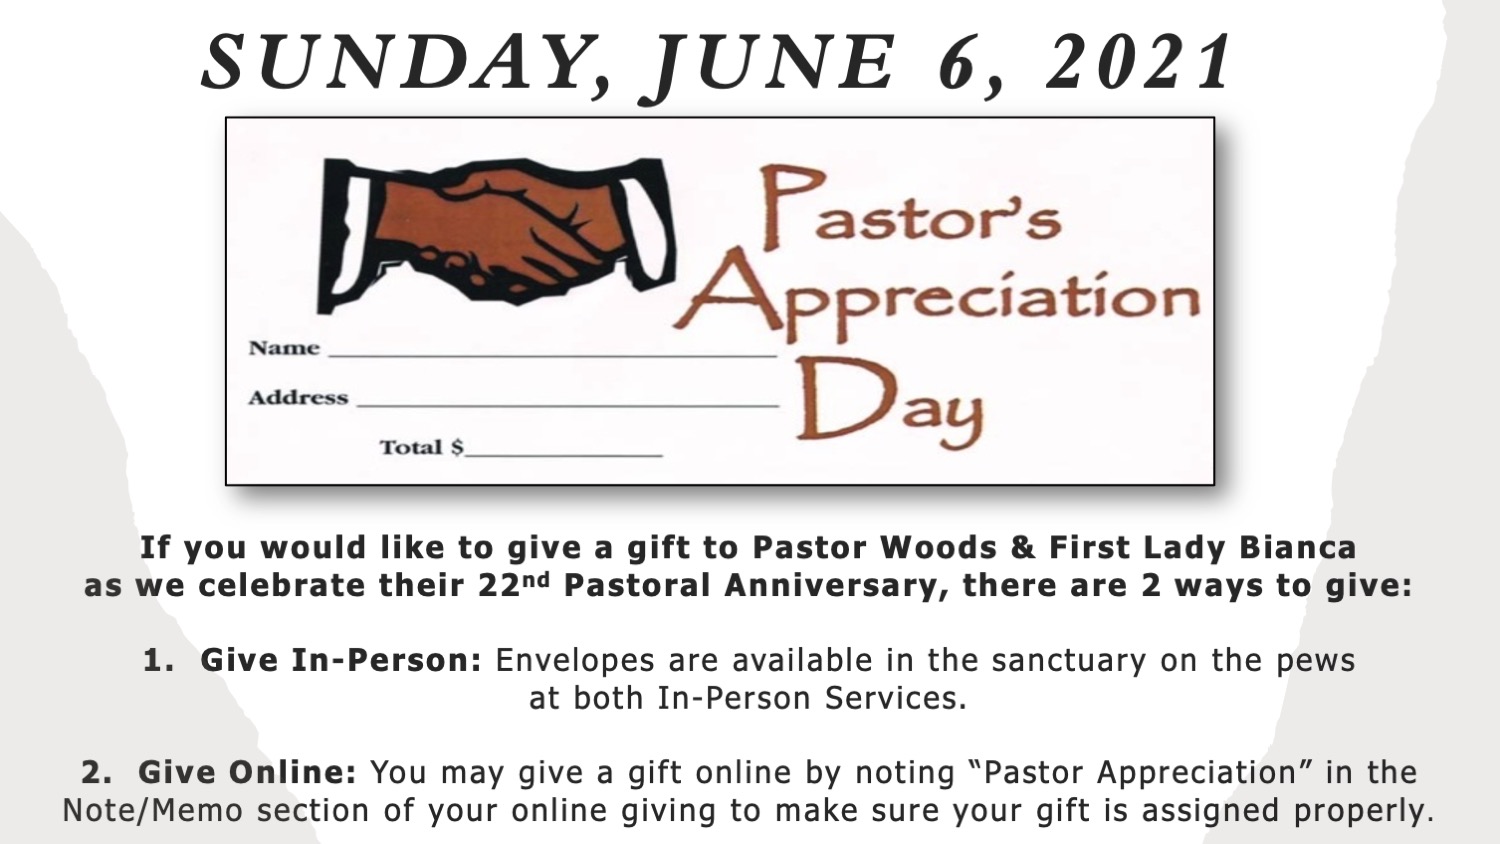 Ways to give a gift to Pastor Woods